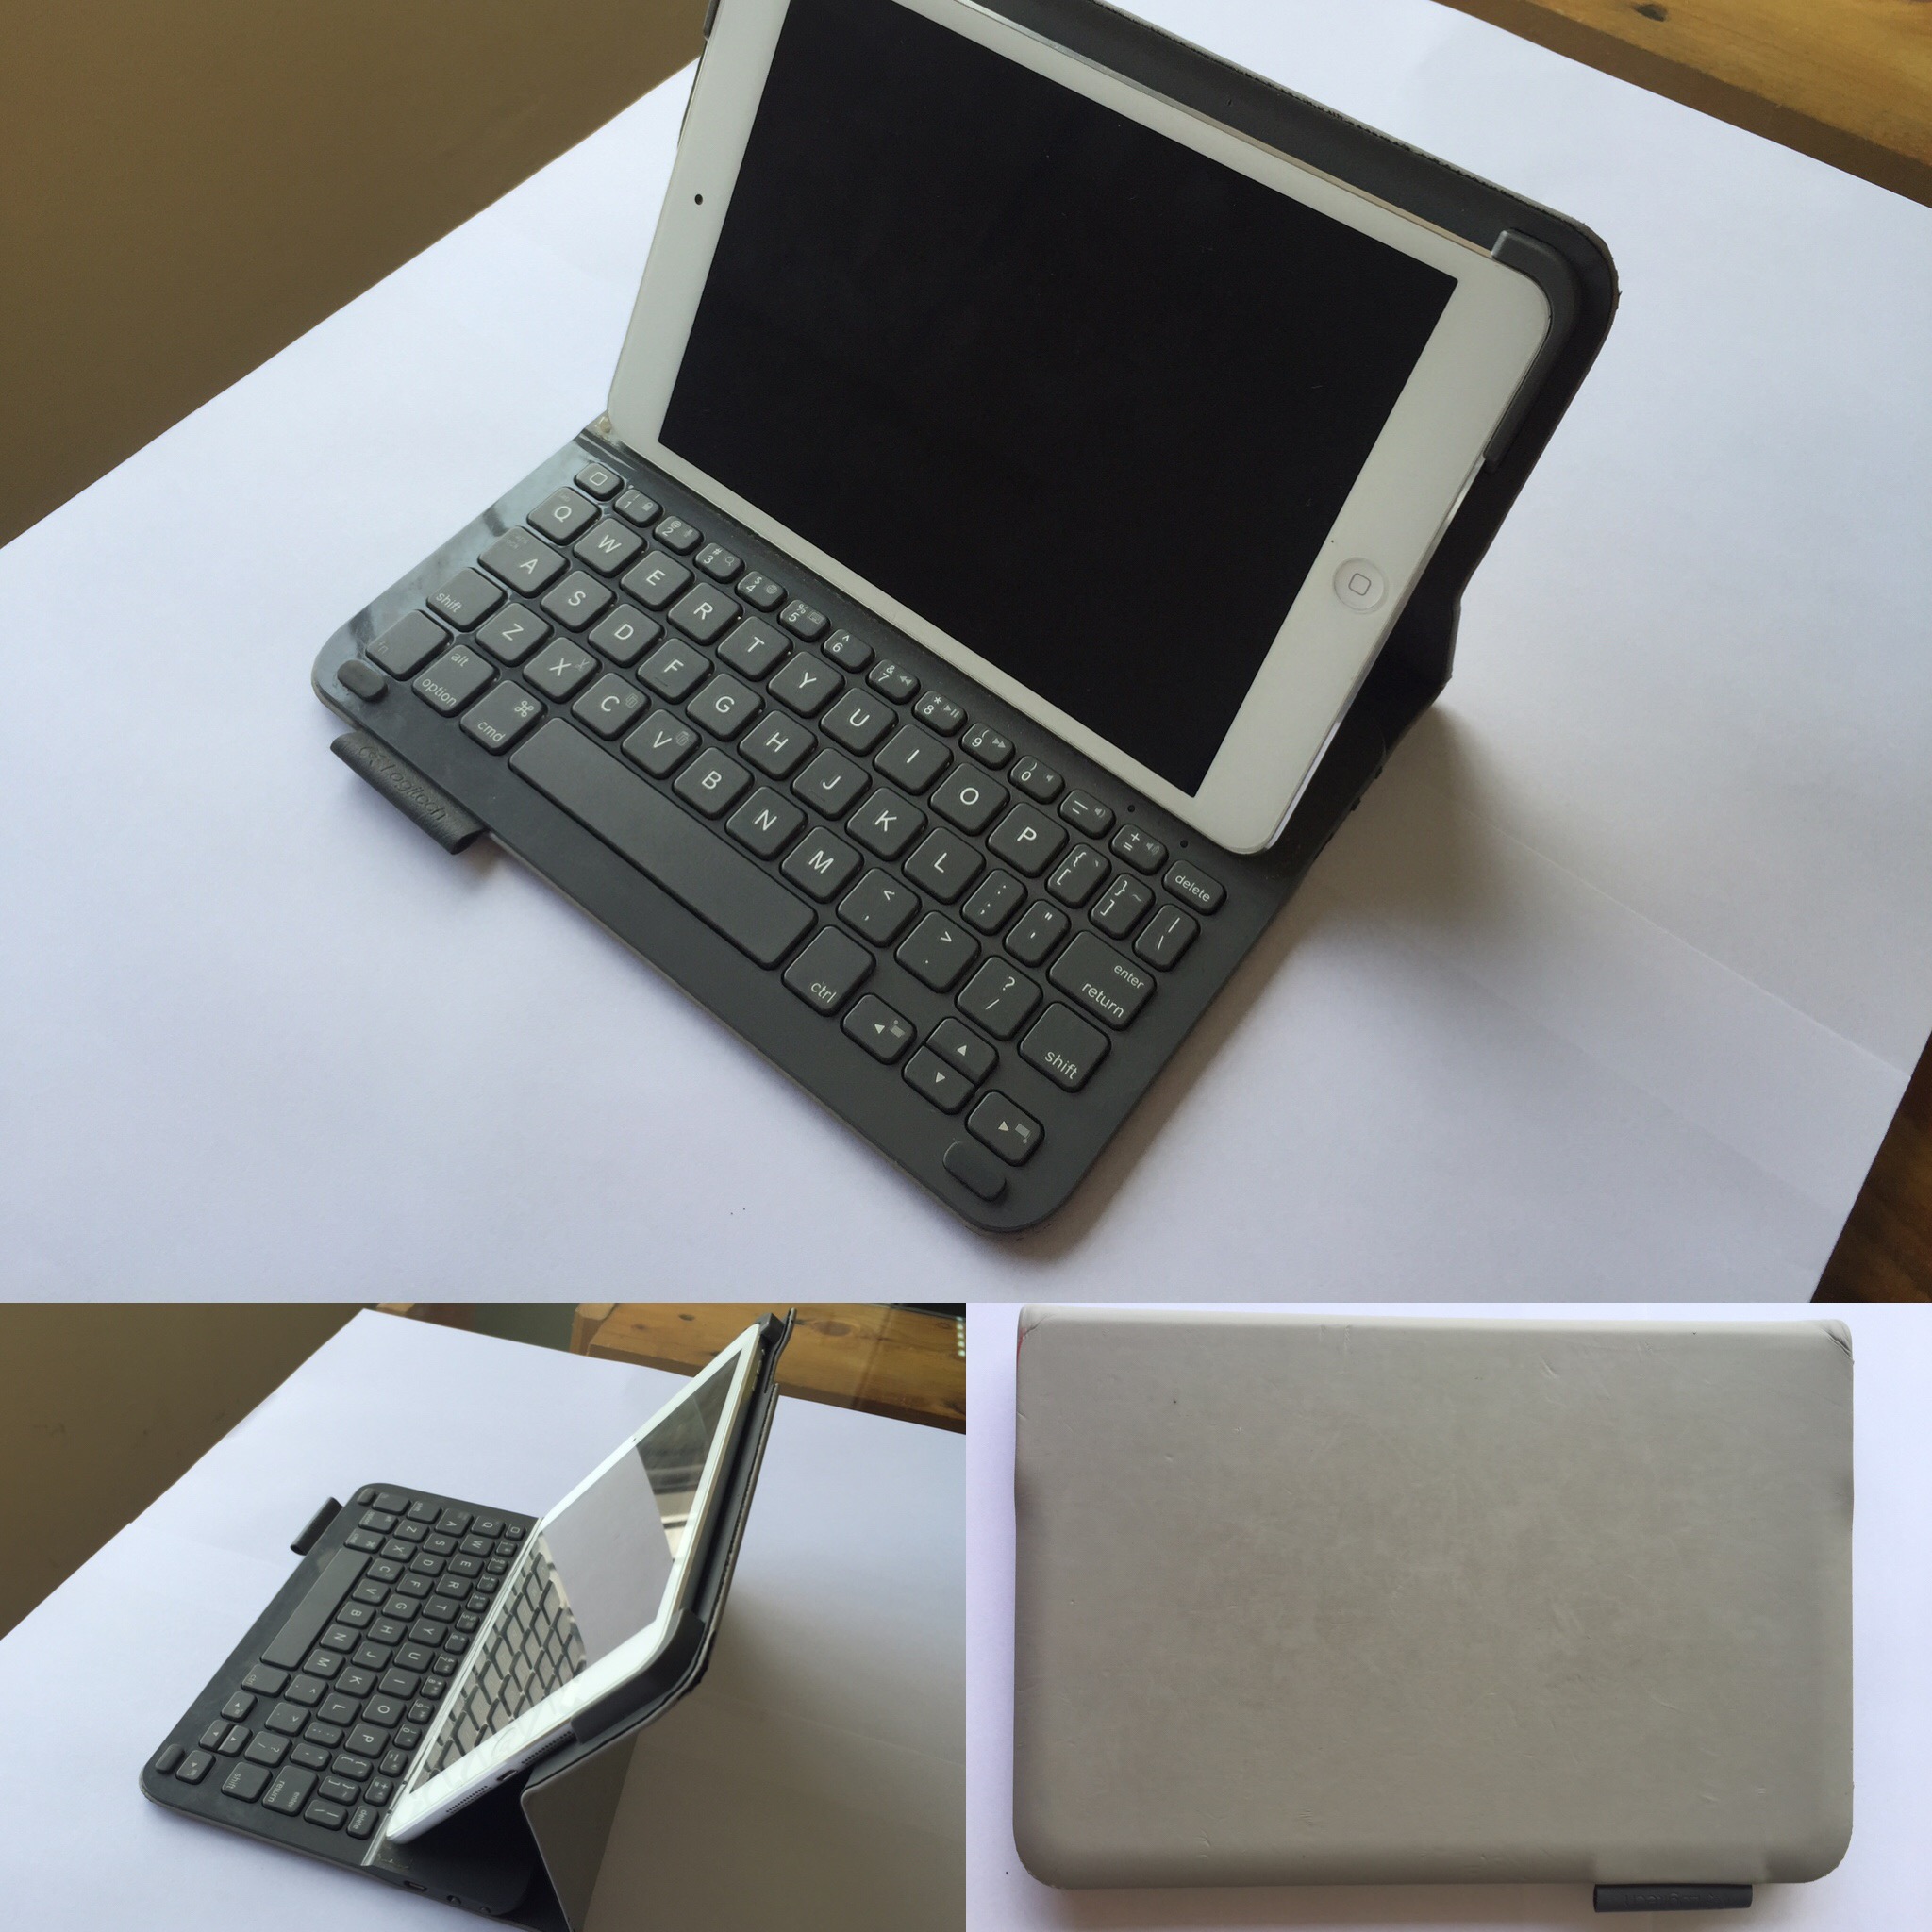 Logitech Ultrathin Keyboard Cover for iPad mini review - The Gadgeteer